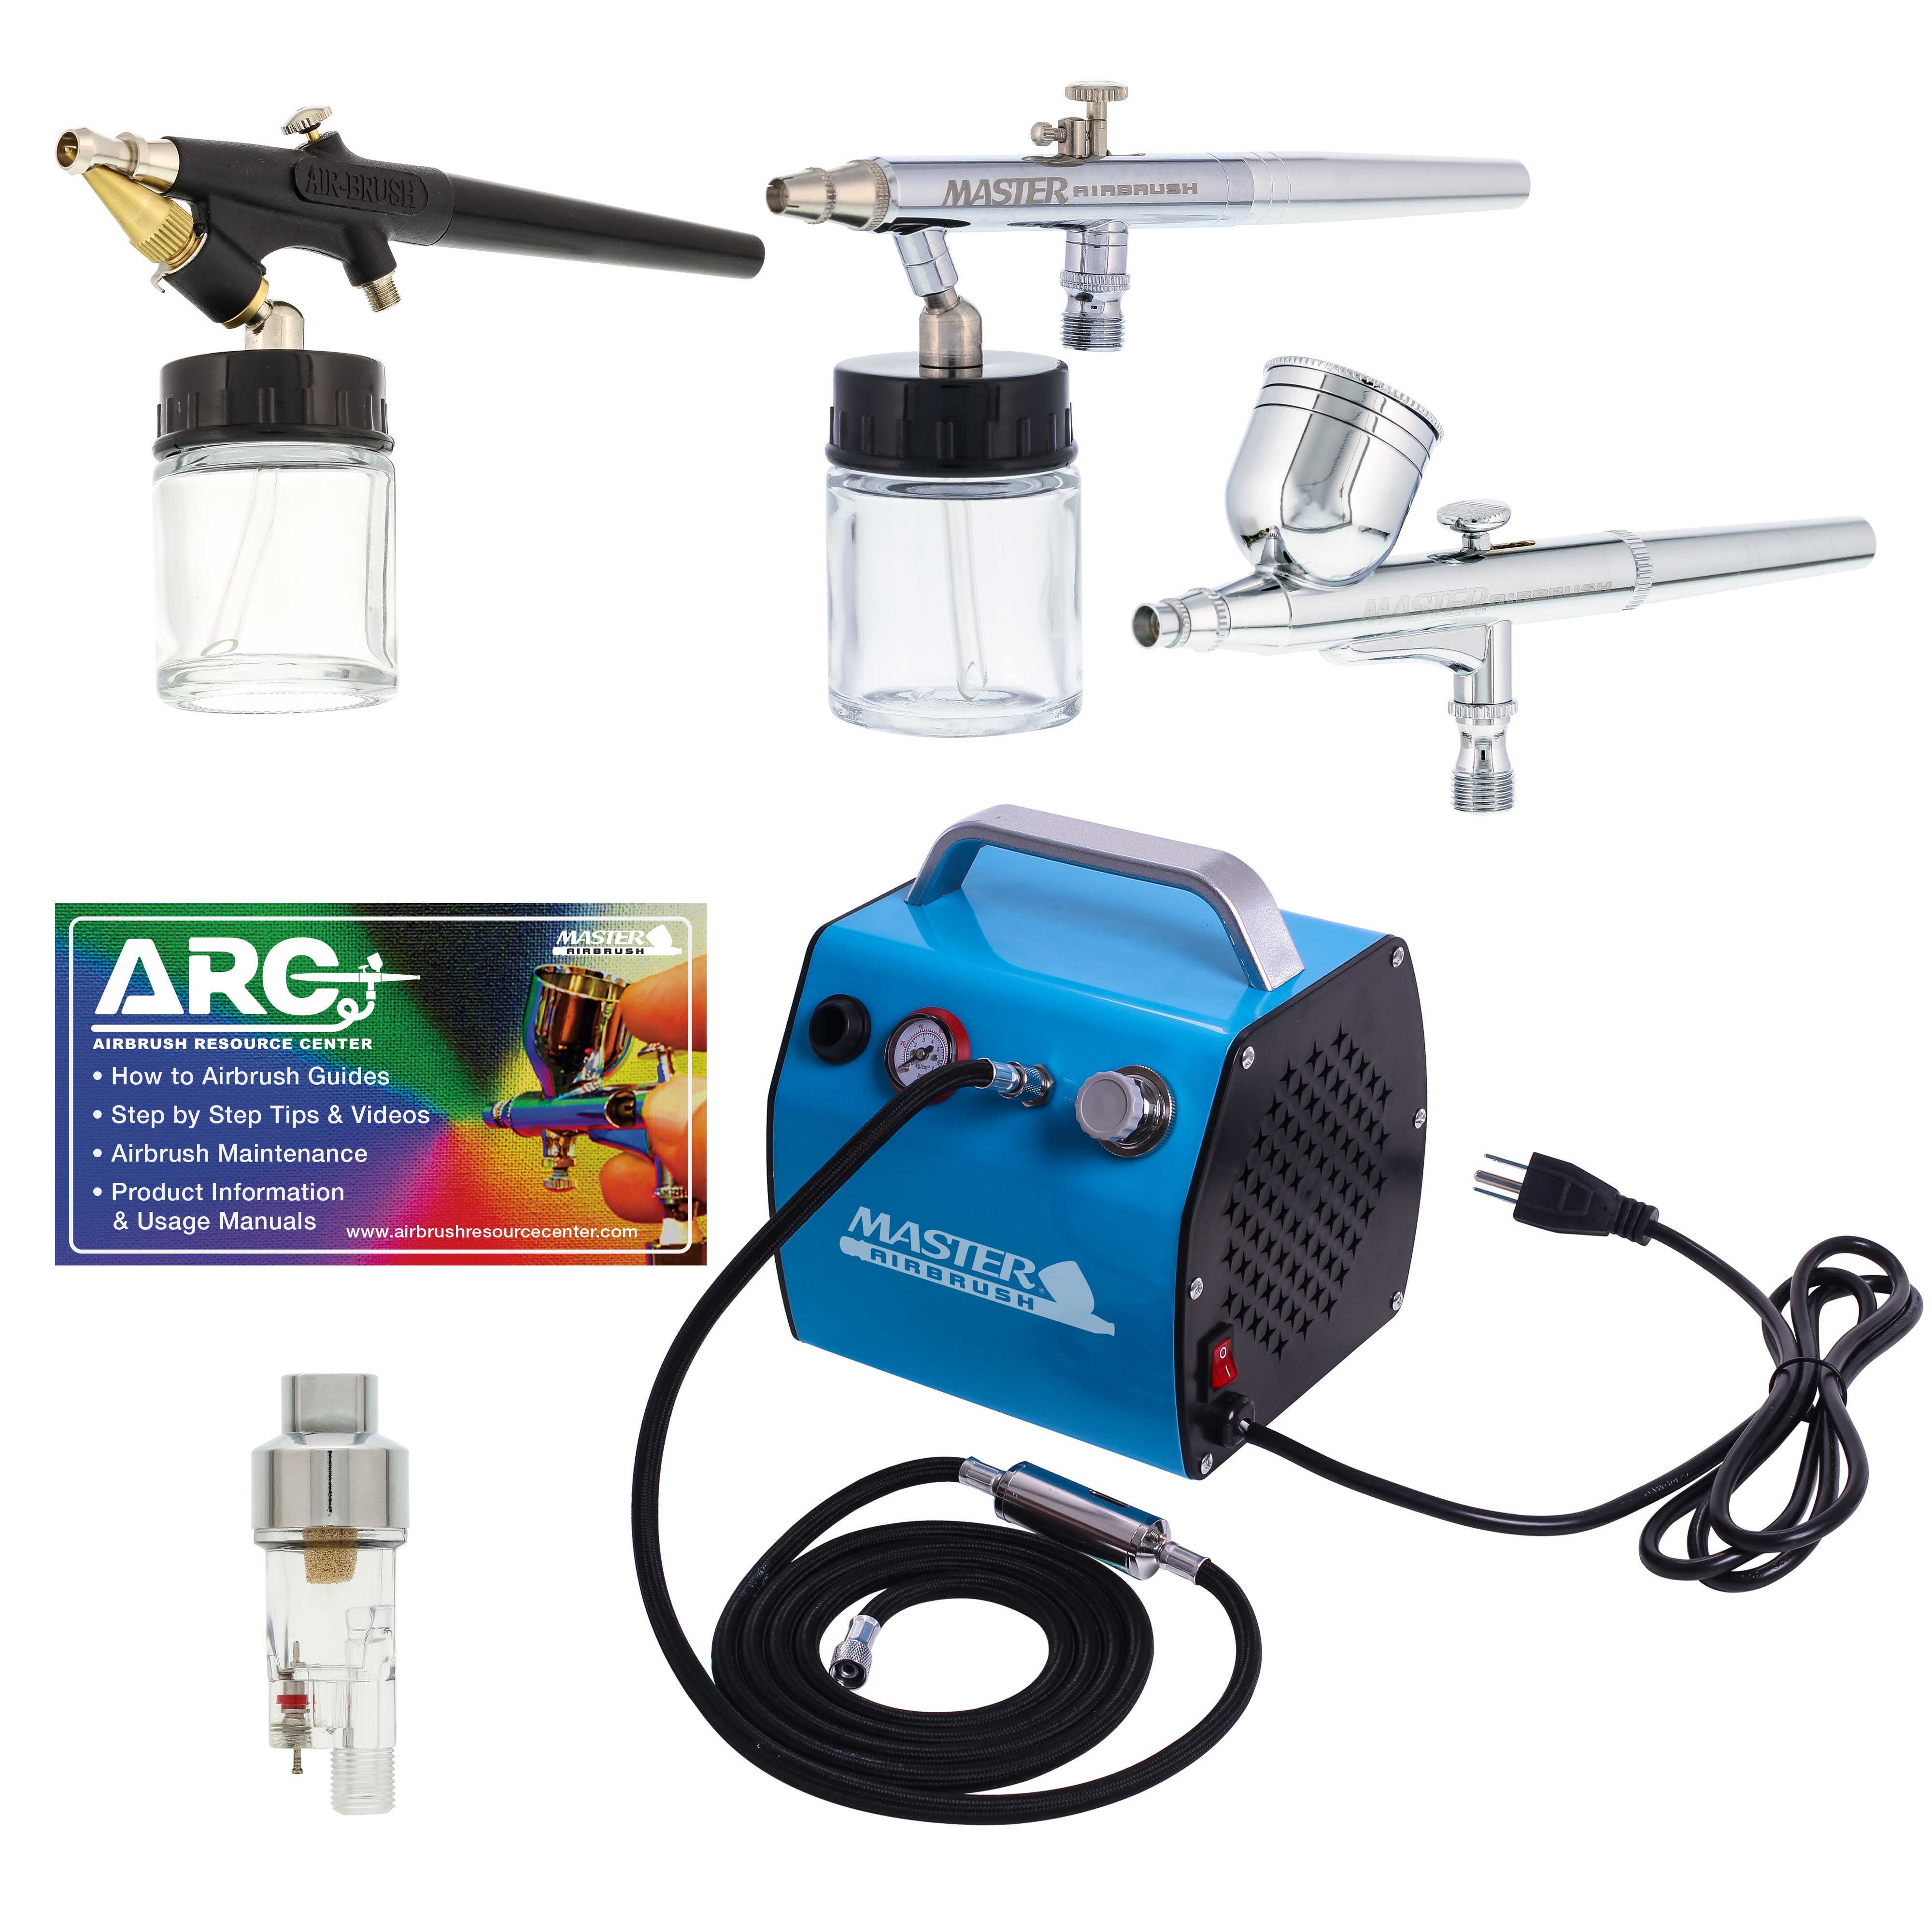 3 Multi-Purpose Master Airbrush Kit with High Performance Compact